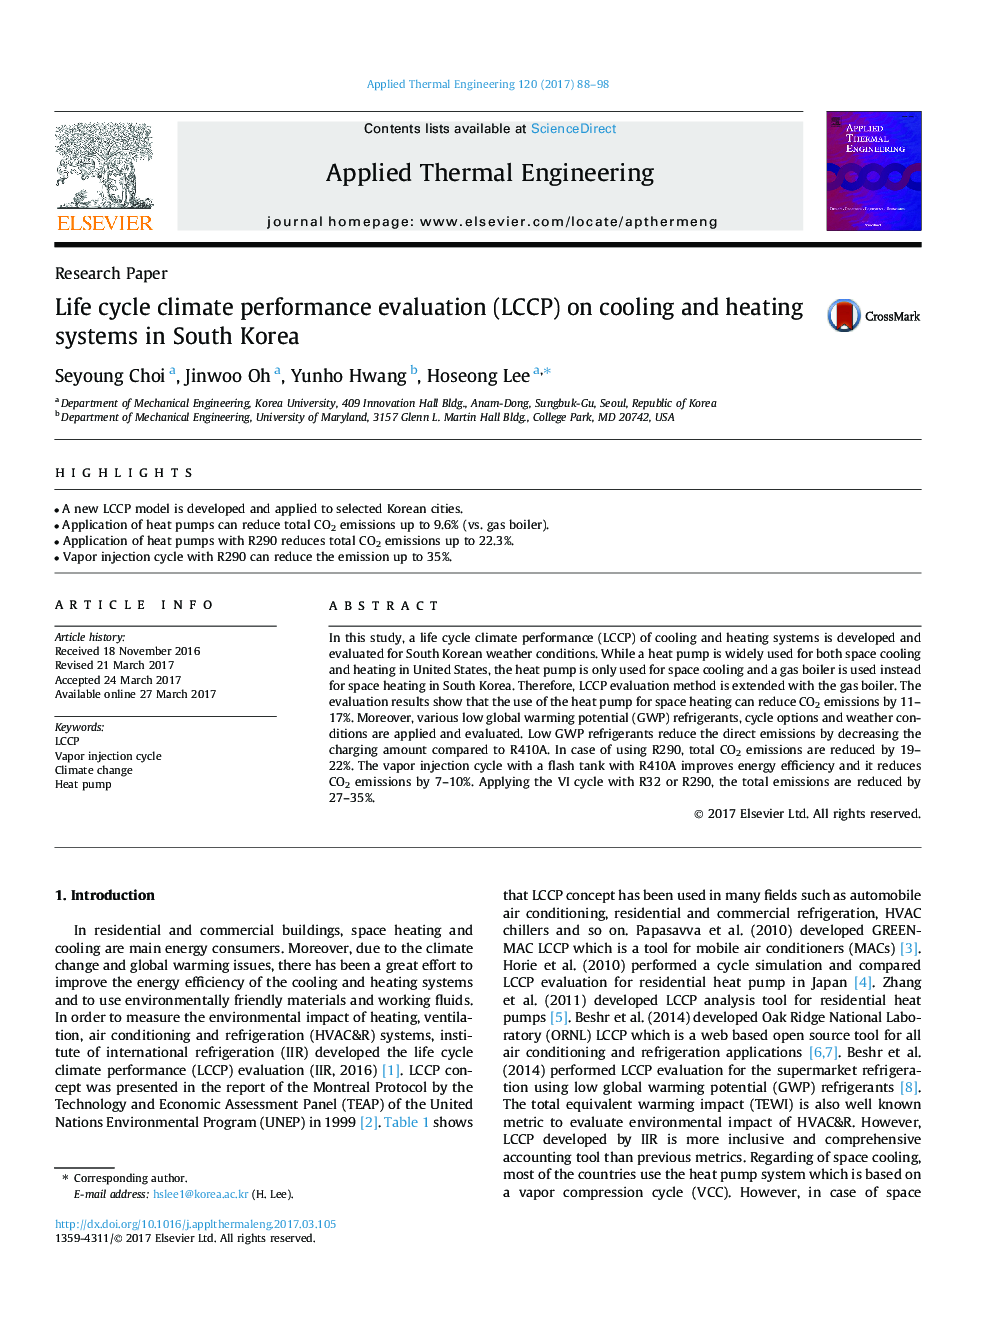 Research PaperLife cycle climate performance evaluation (LCCP) on cooling and heating systems in South Korea